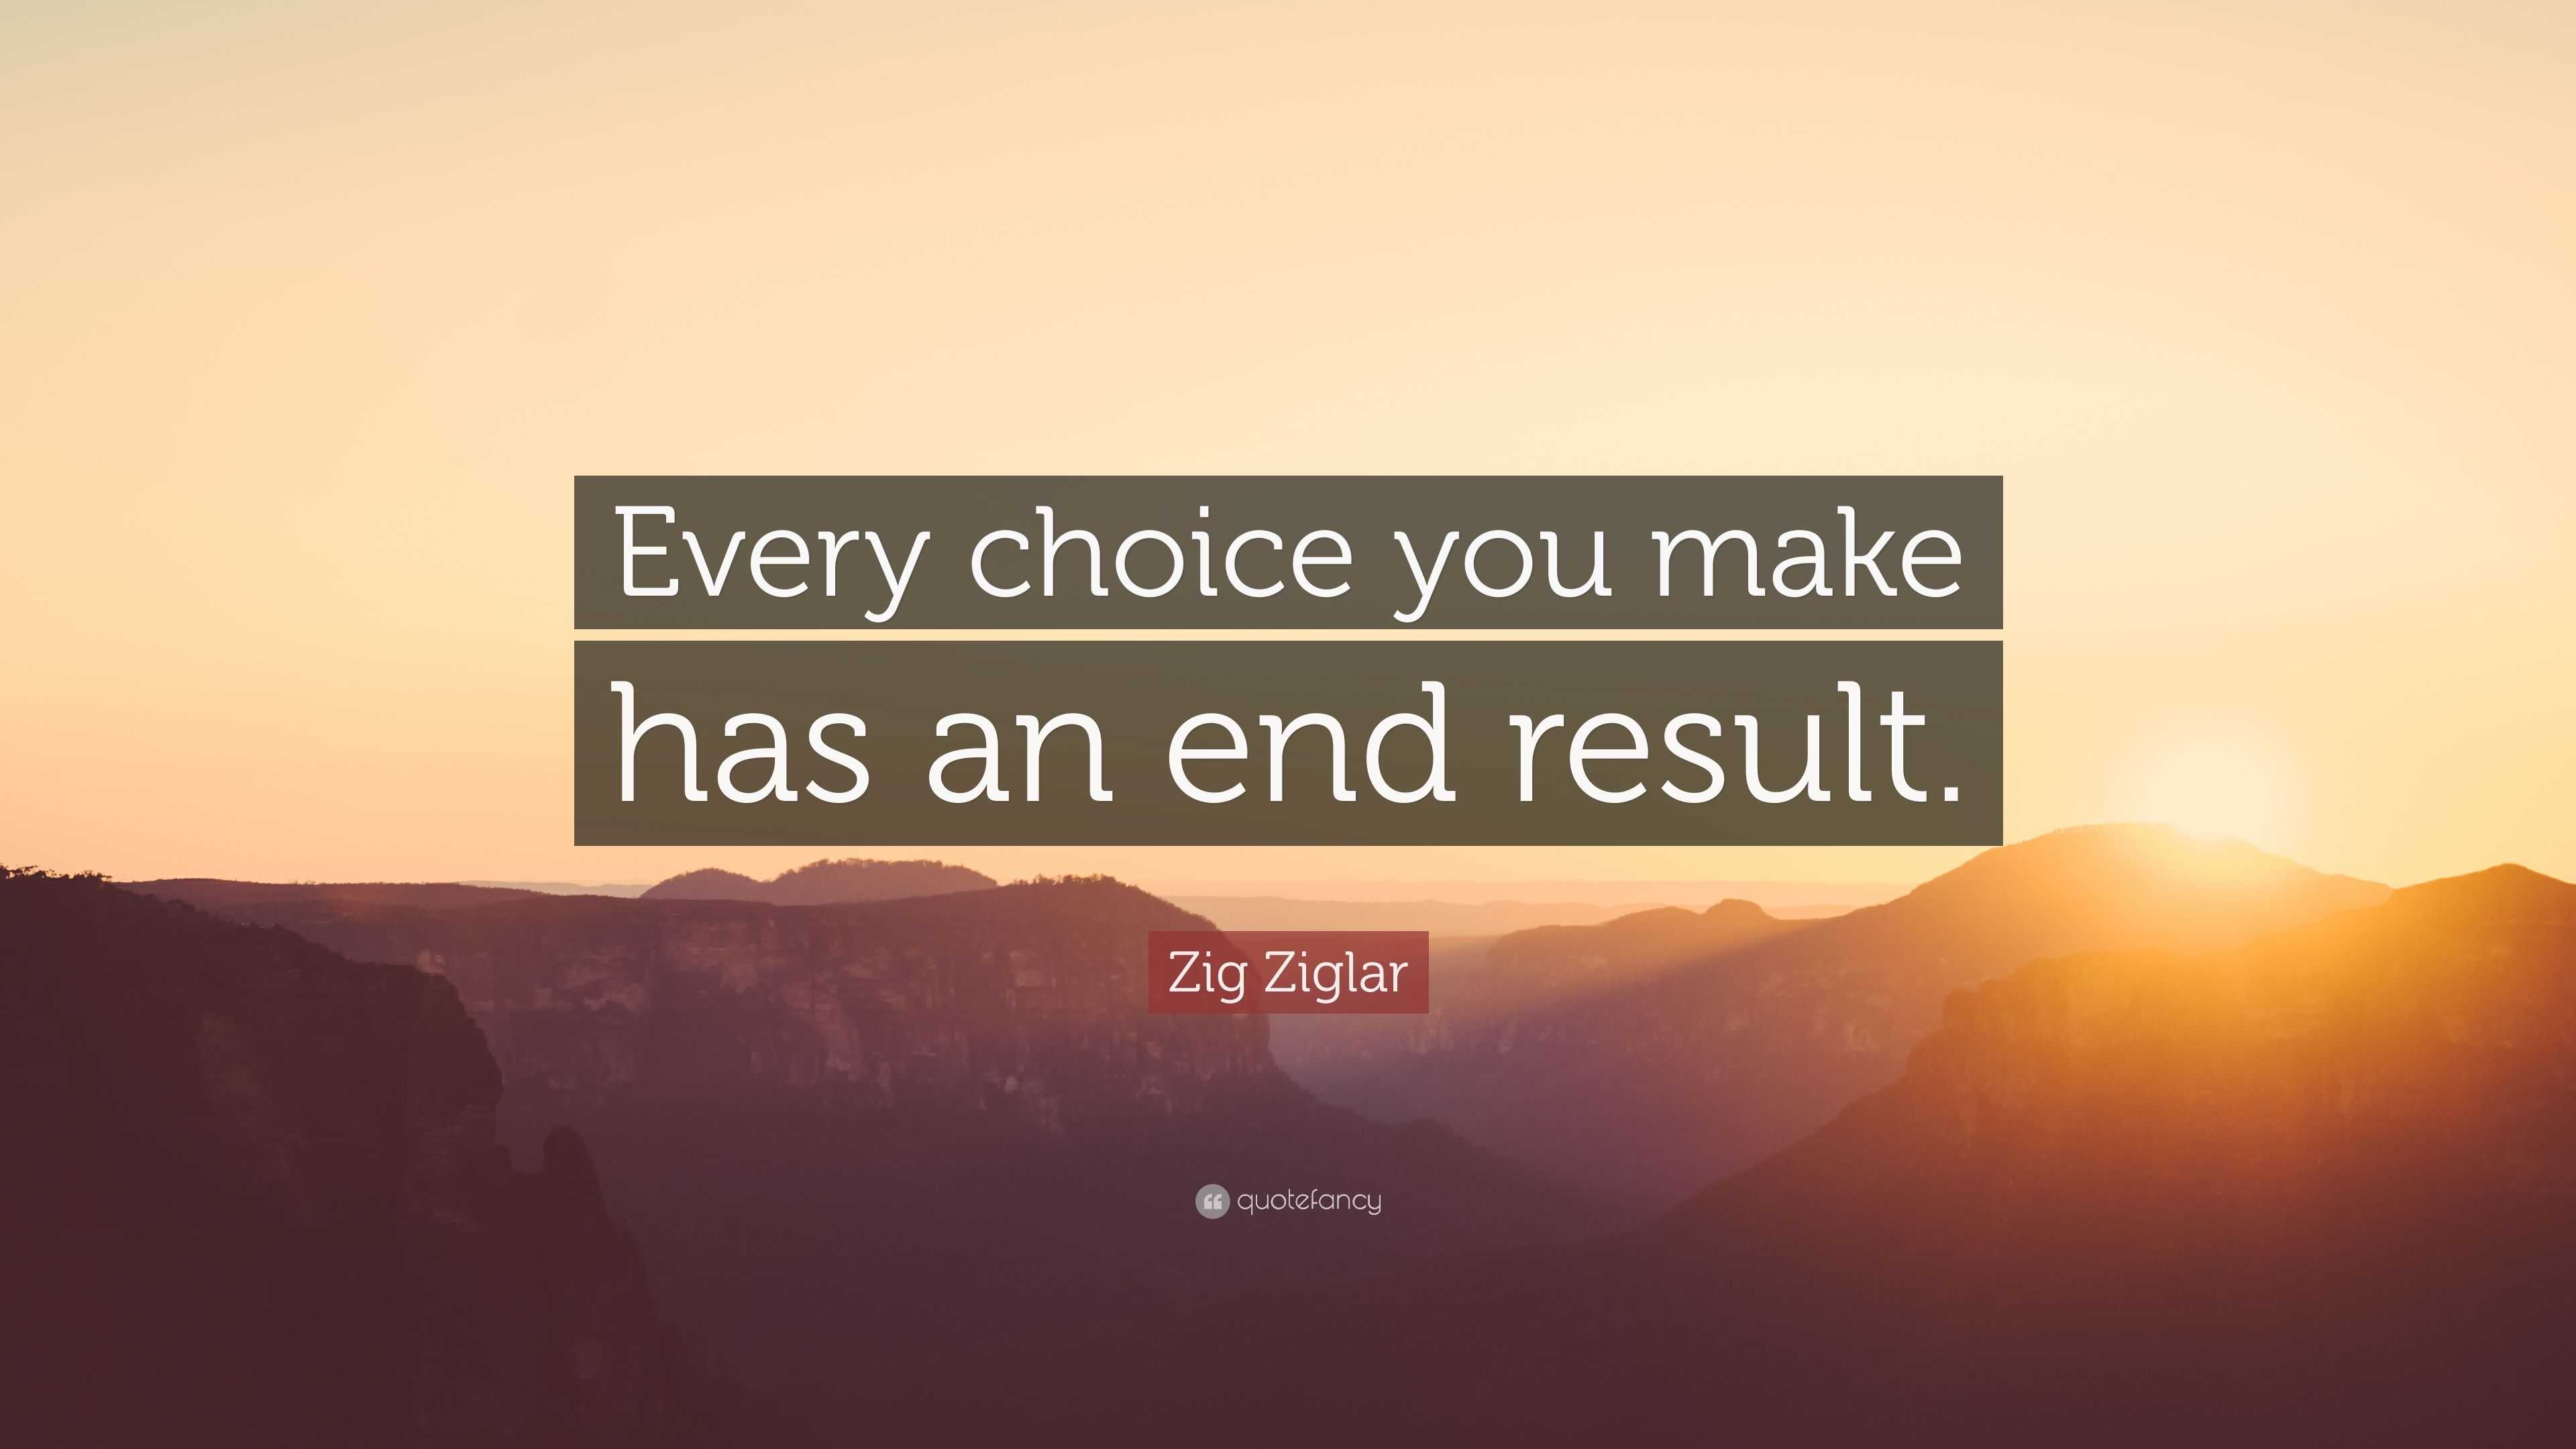 Zig Ziglar Quote "Every Choice You Make Has An End Result" .